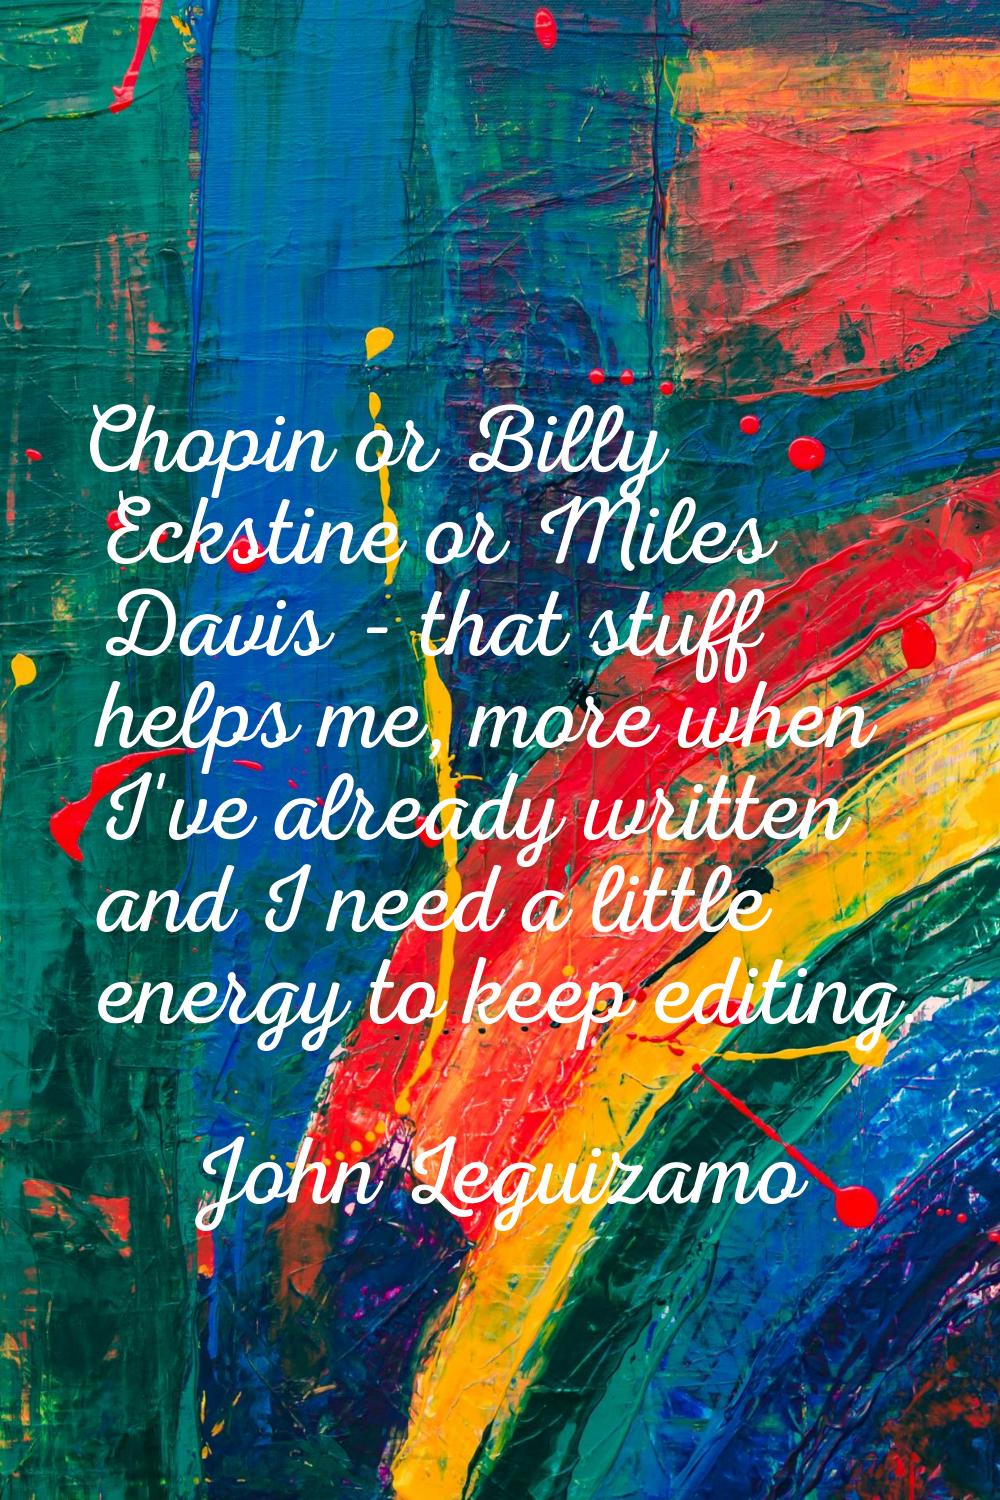 Chopin or Billy Eckstine or Miles Davis - that stuff helps me, more when I've already written and I